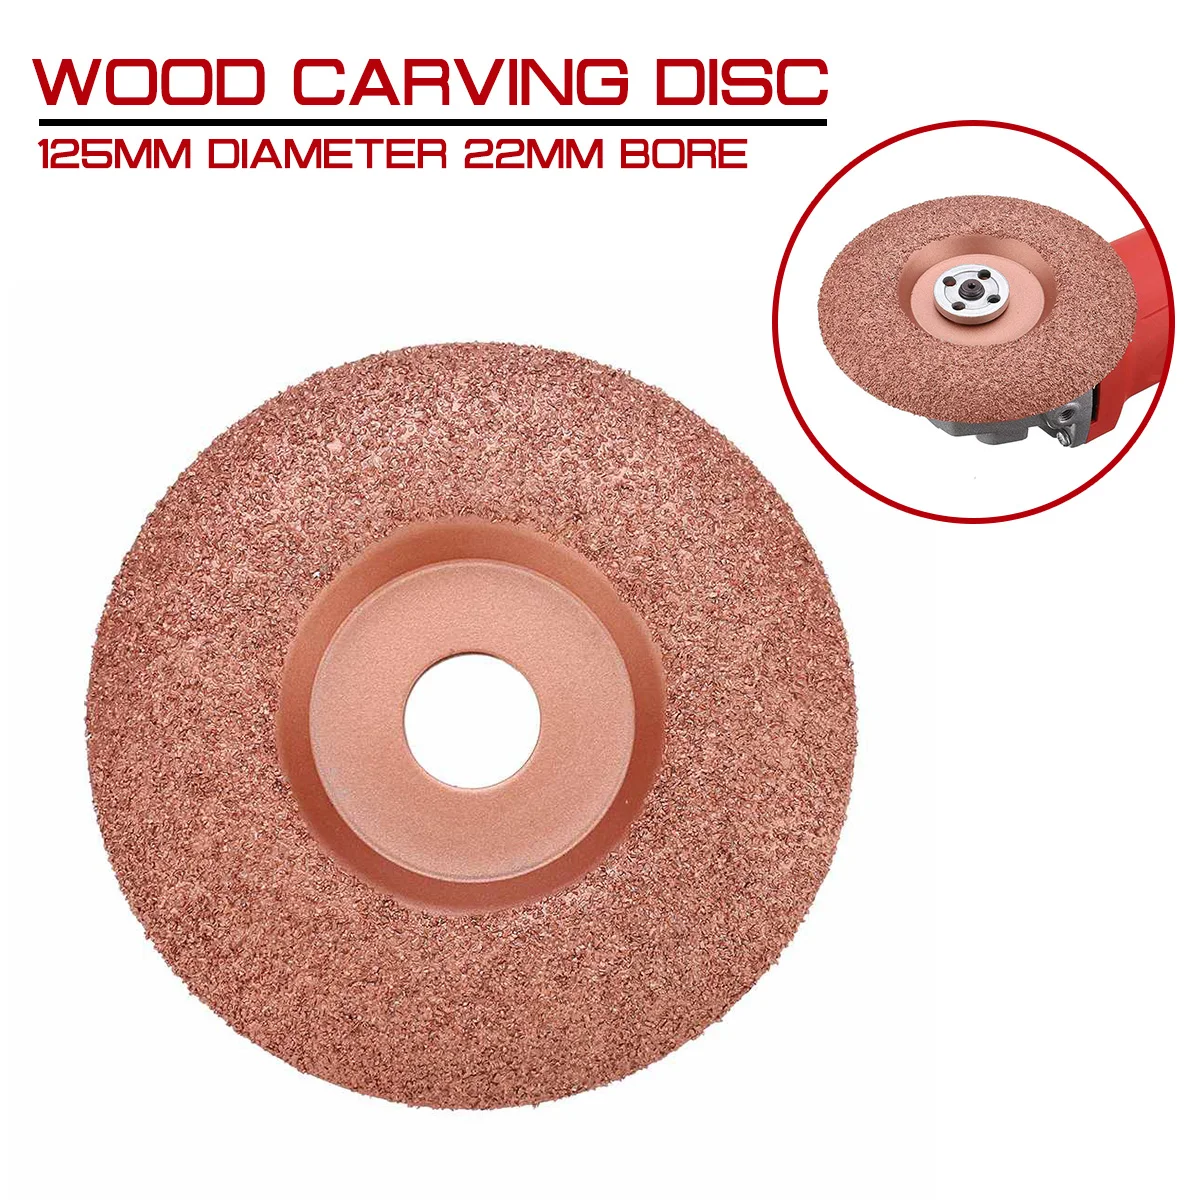 

125mm Diameter 22mm Bore Angle Grinder Disc Wood Carving Disc Wood Shaping Disc Tungsten Carbide Shaping Dish